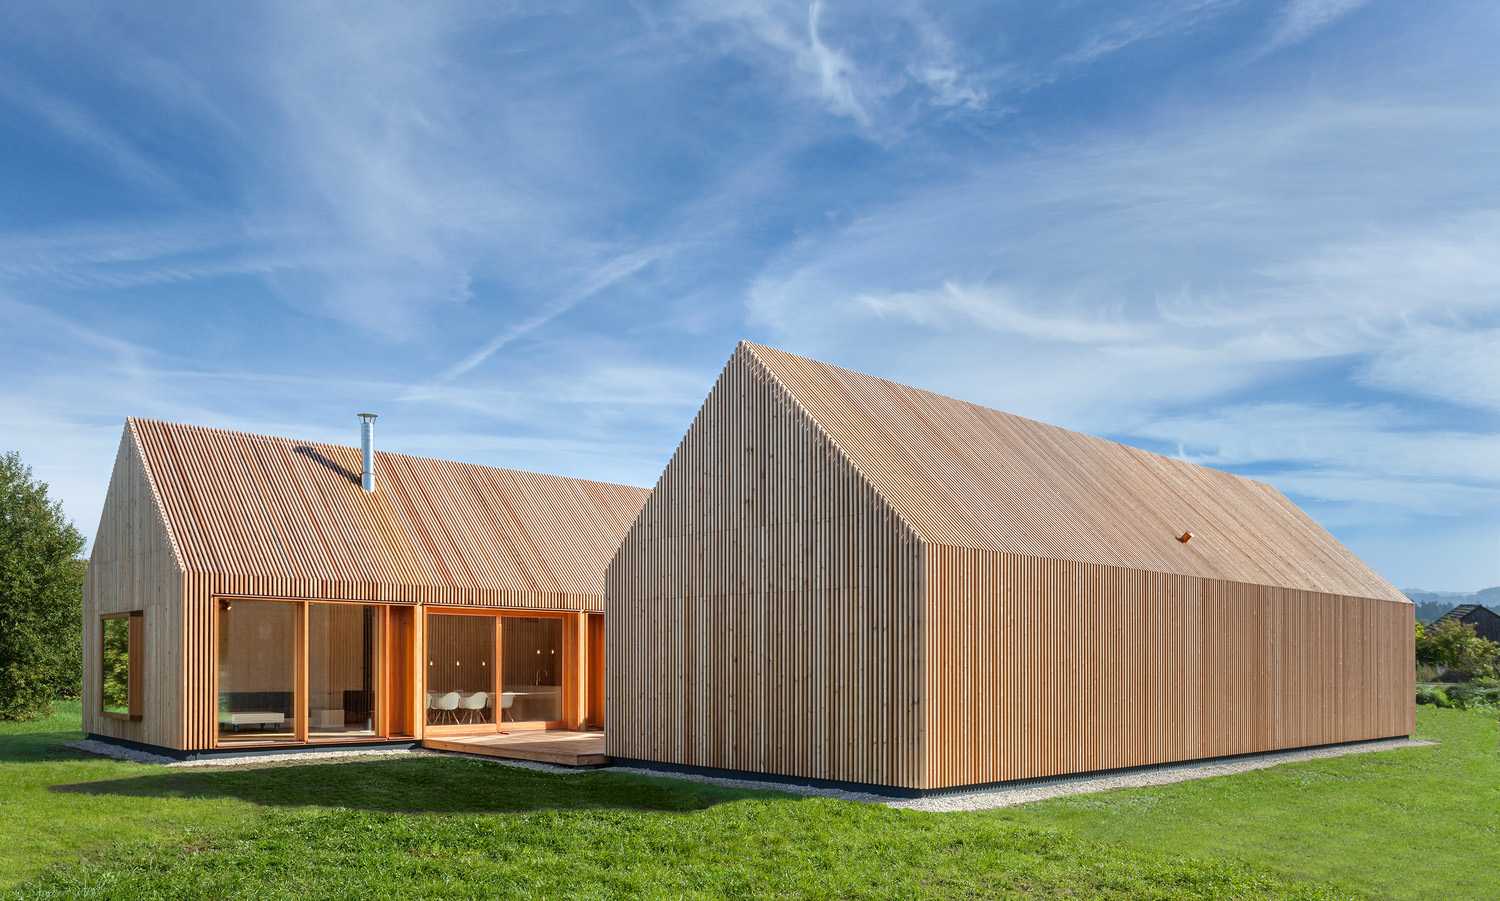 Minimal design for a wooden house. Harmony between the larch wood exterior and the landscape